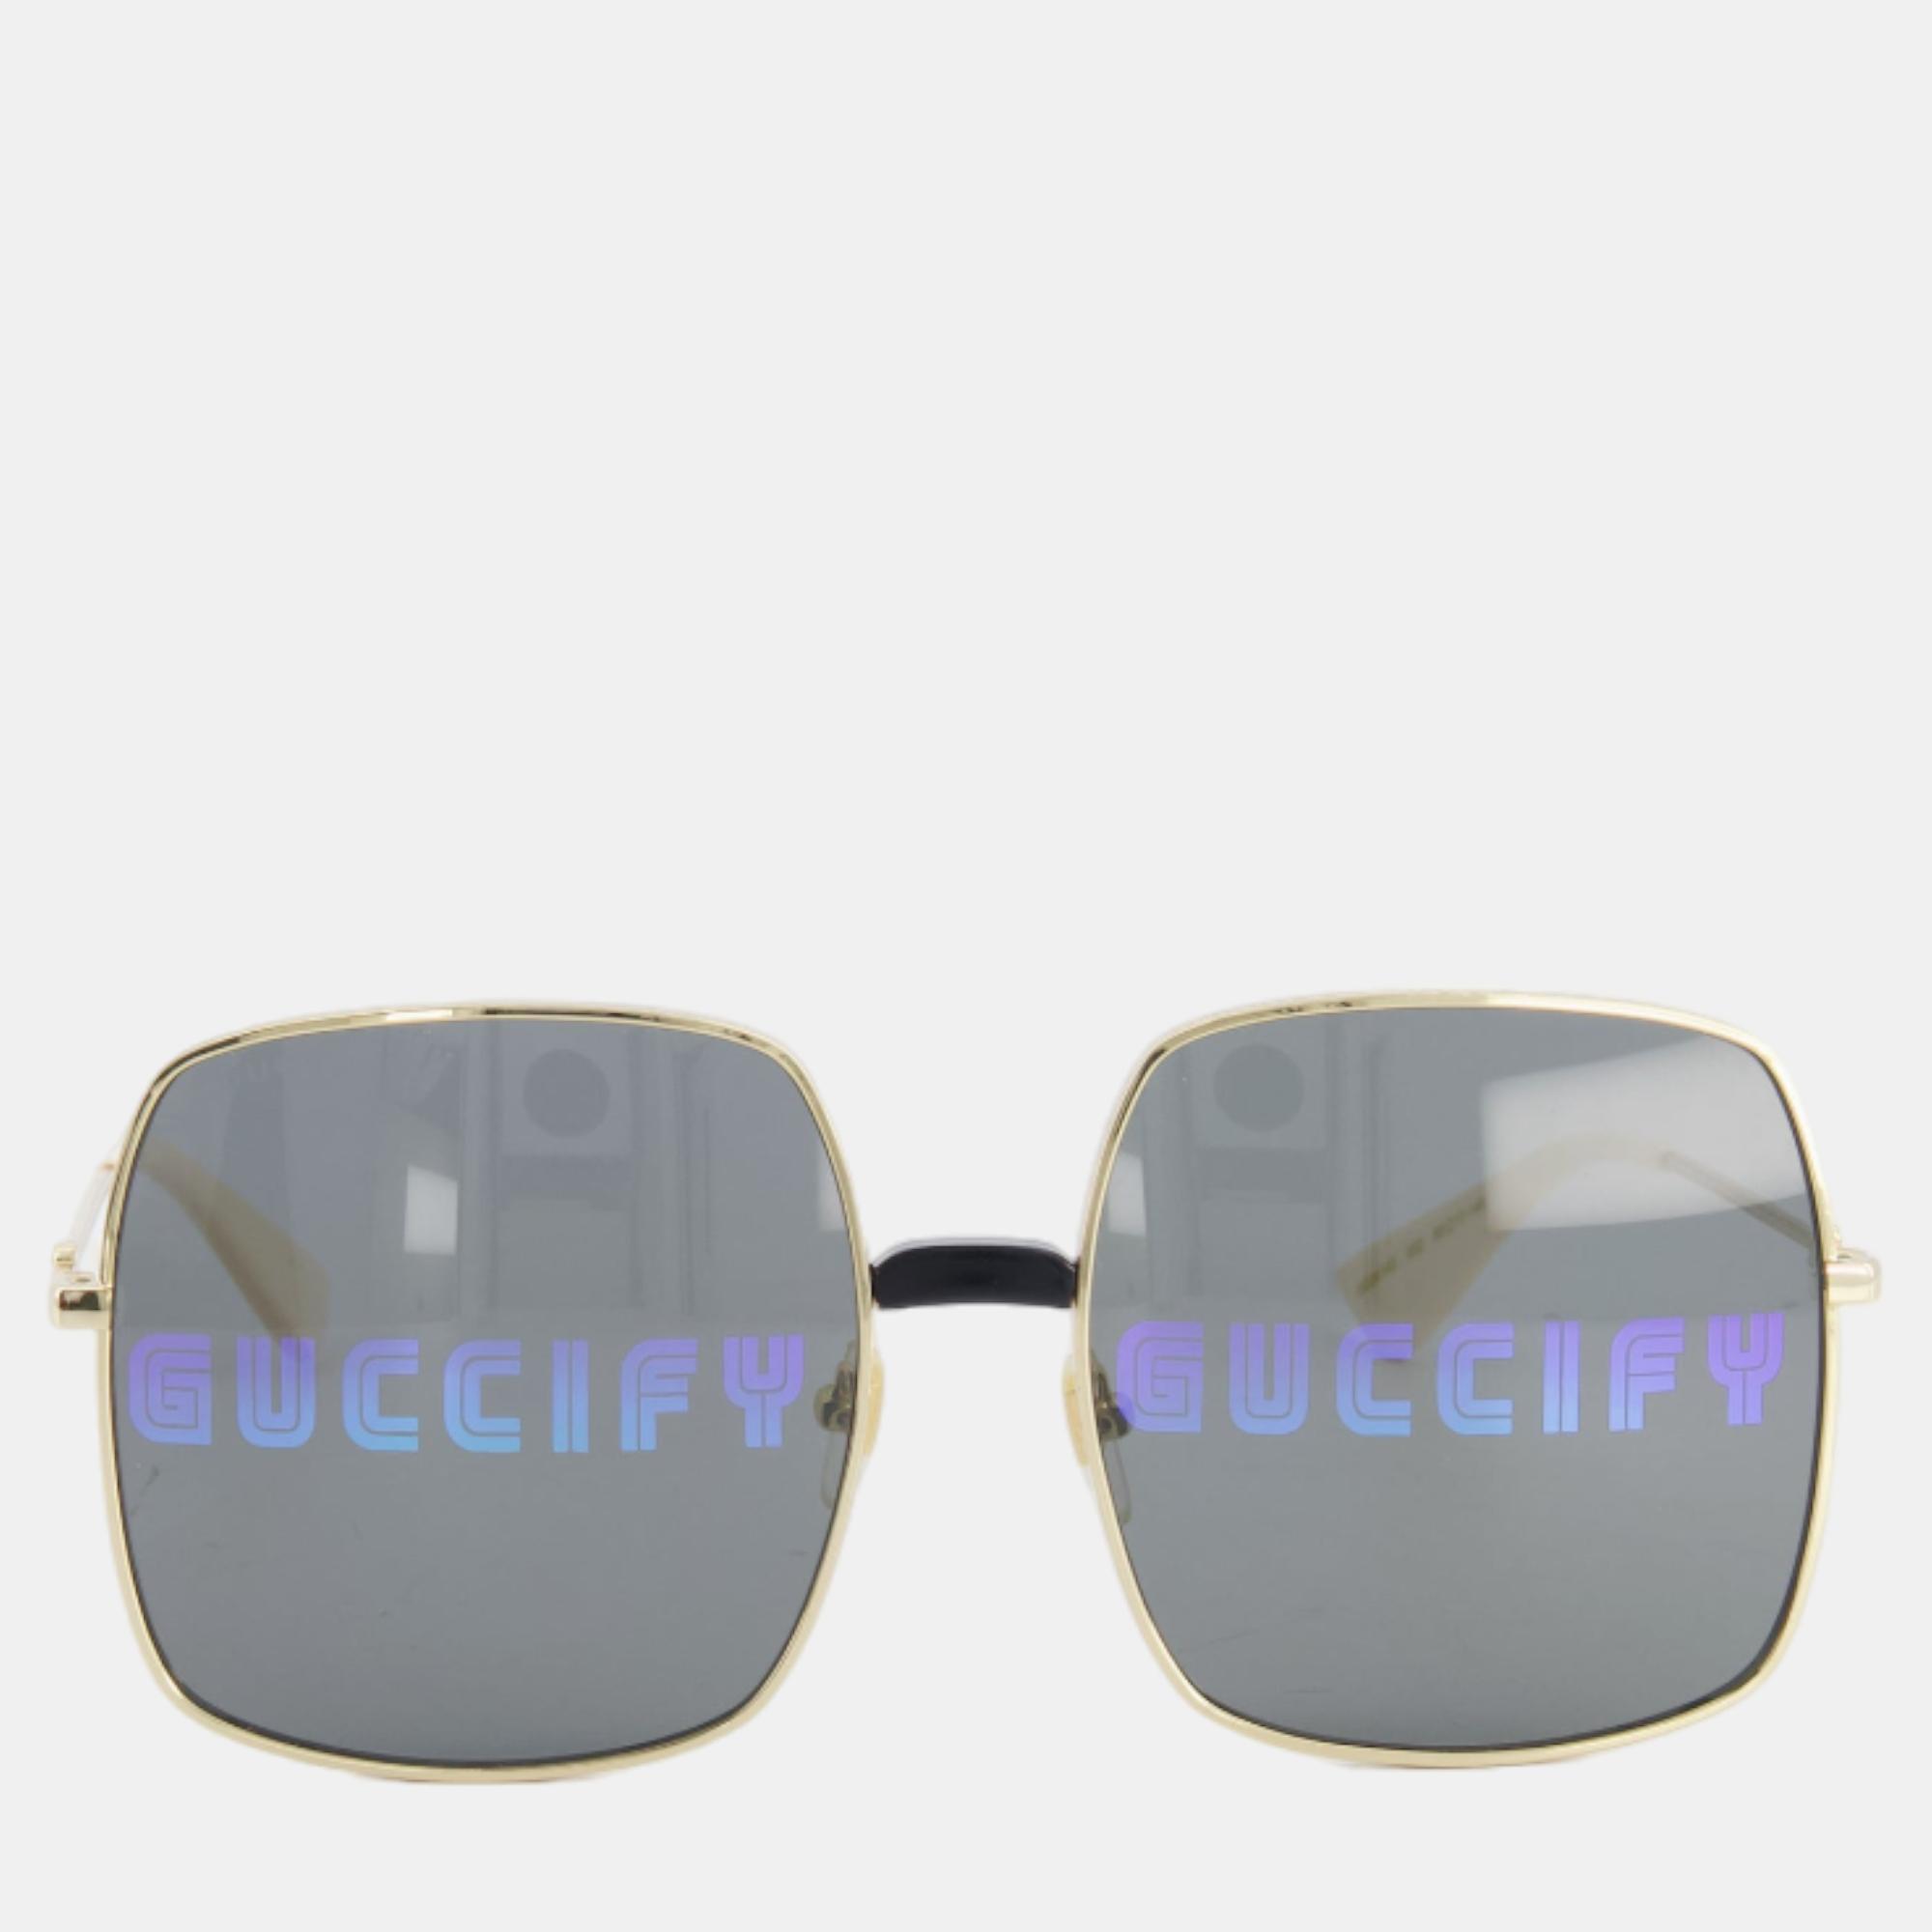 

Gucci Rectangular Metal Frame Sunglasses with Guccify Print, Grey